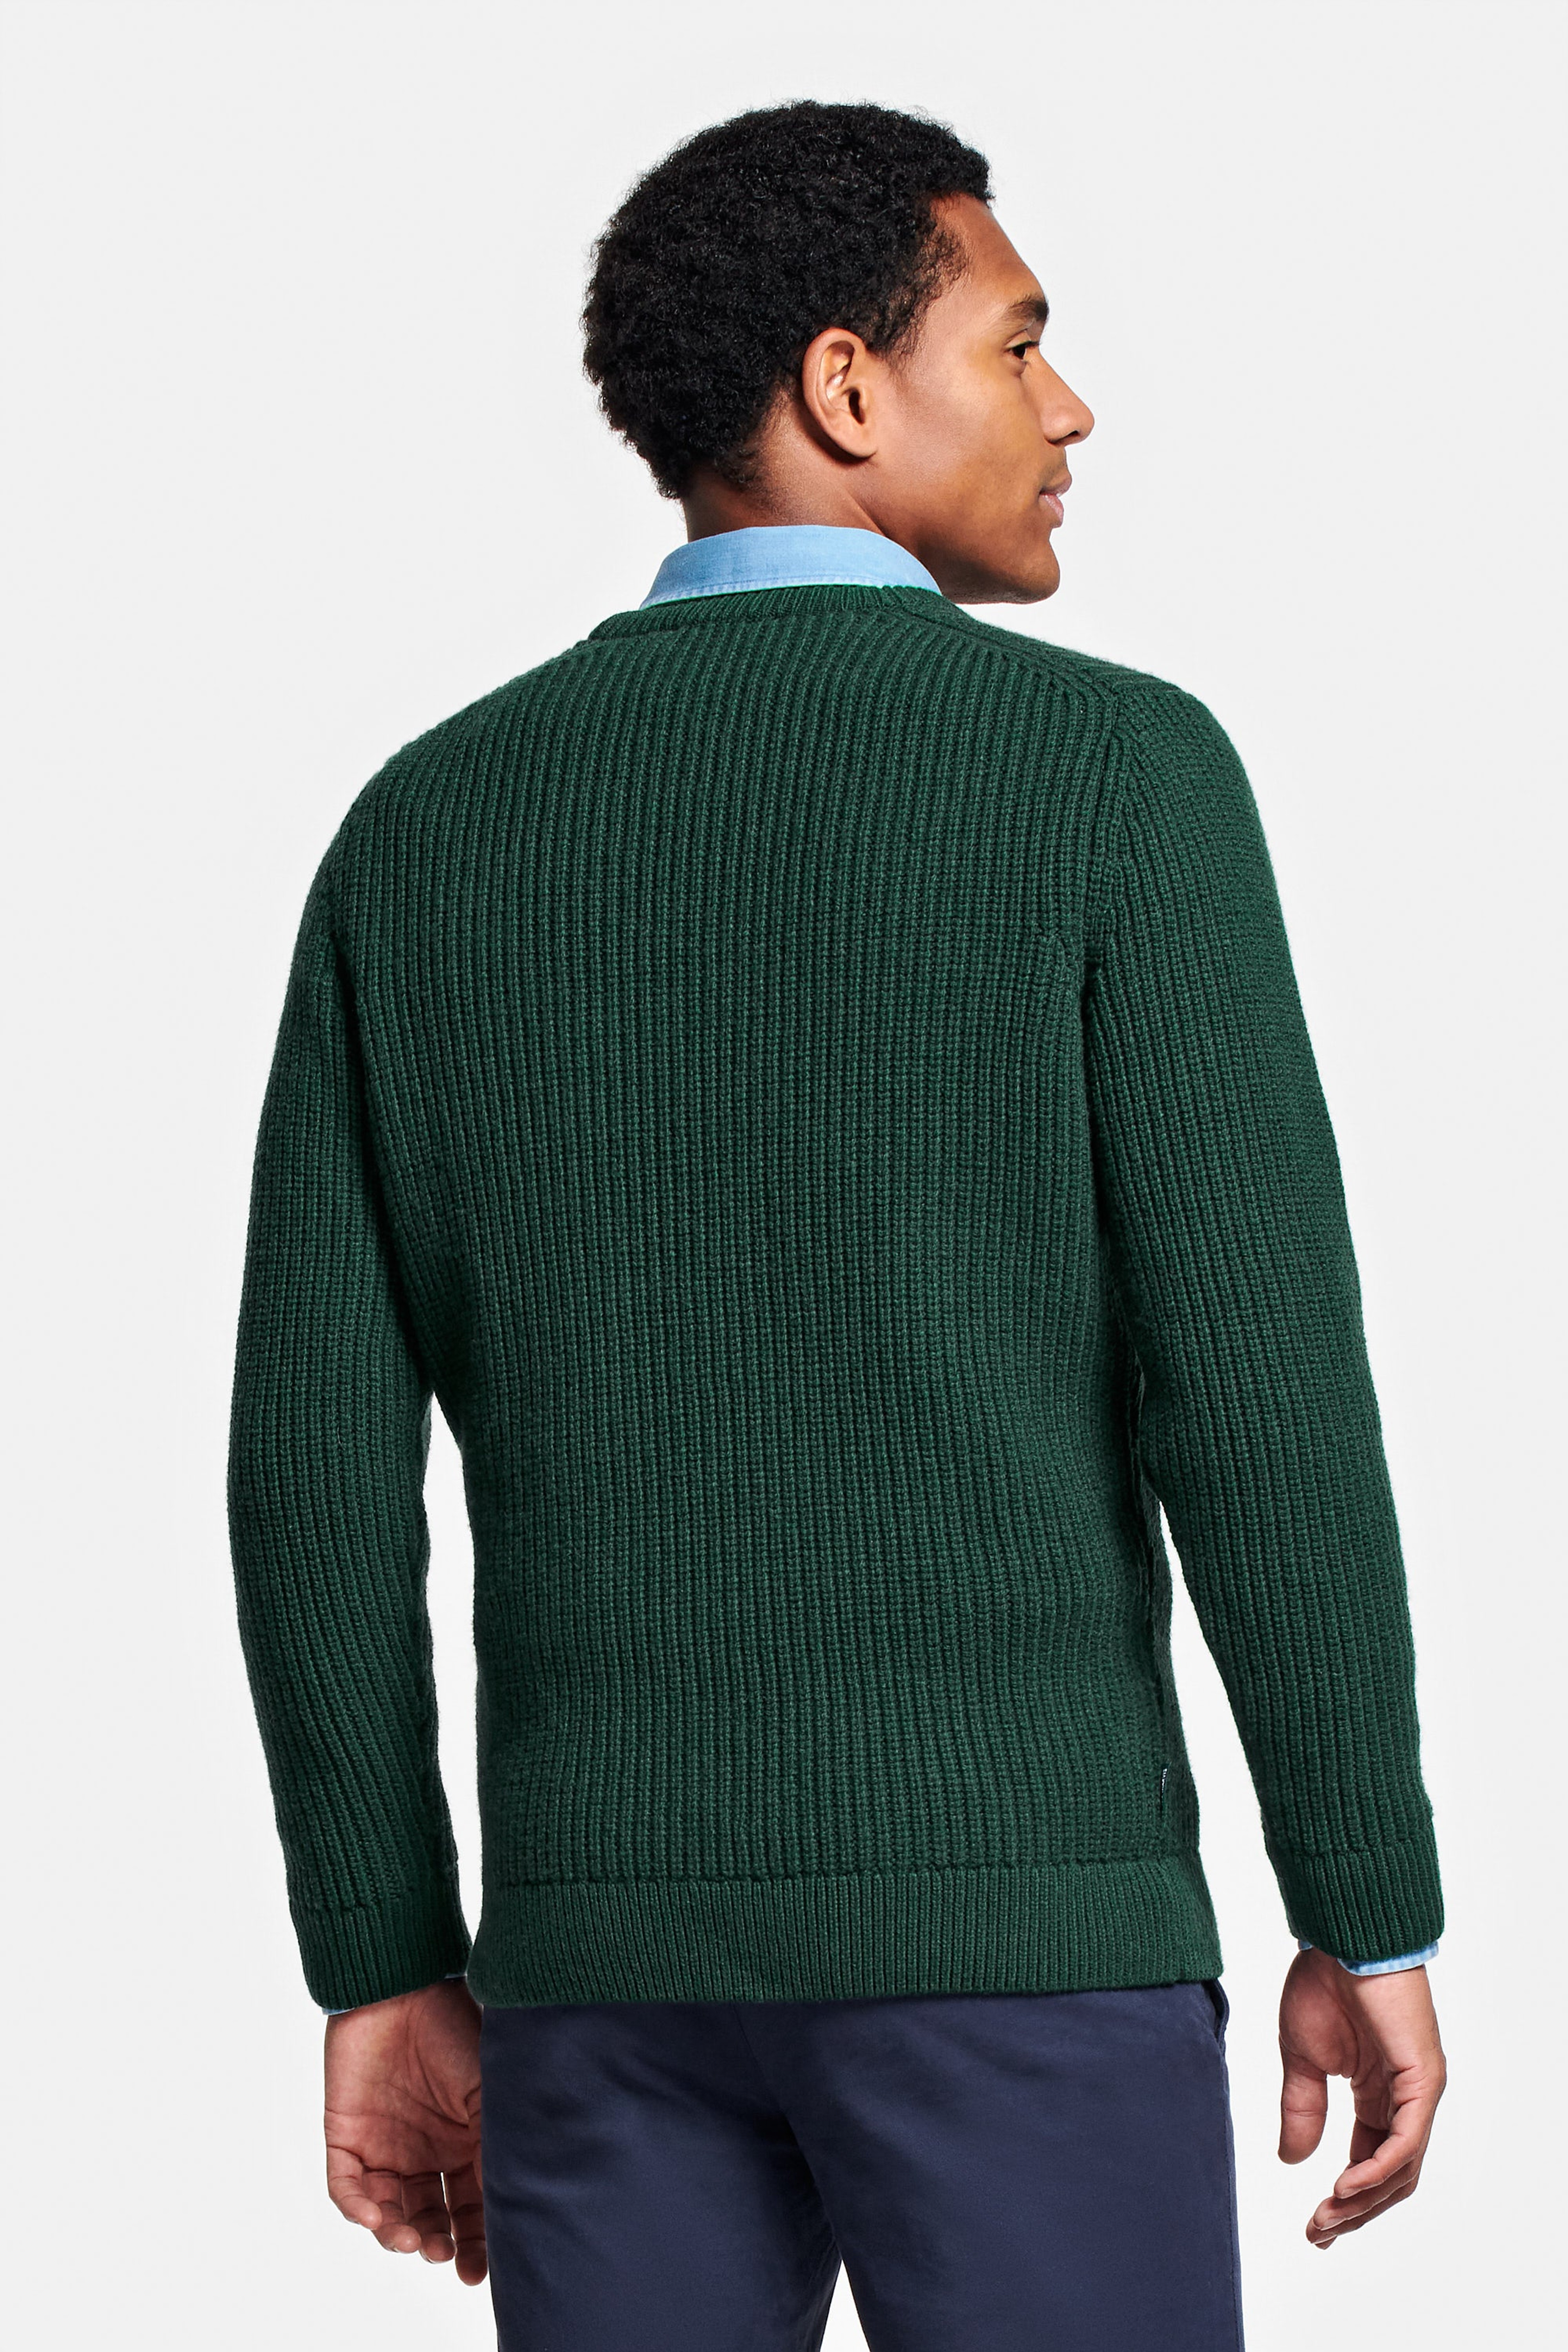 Lakes * The Knit Pullover